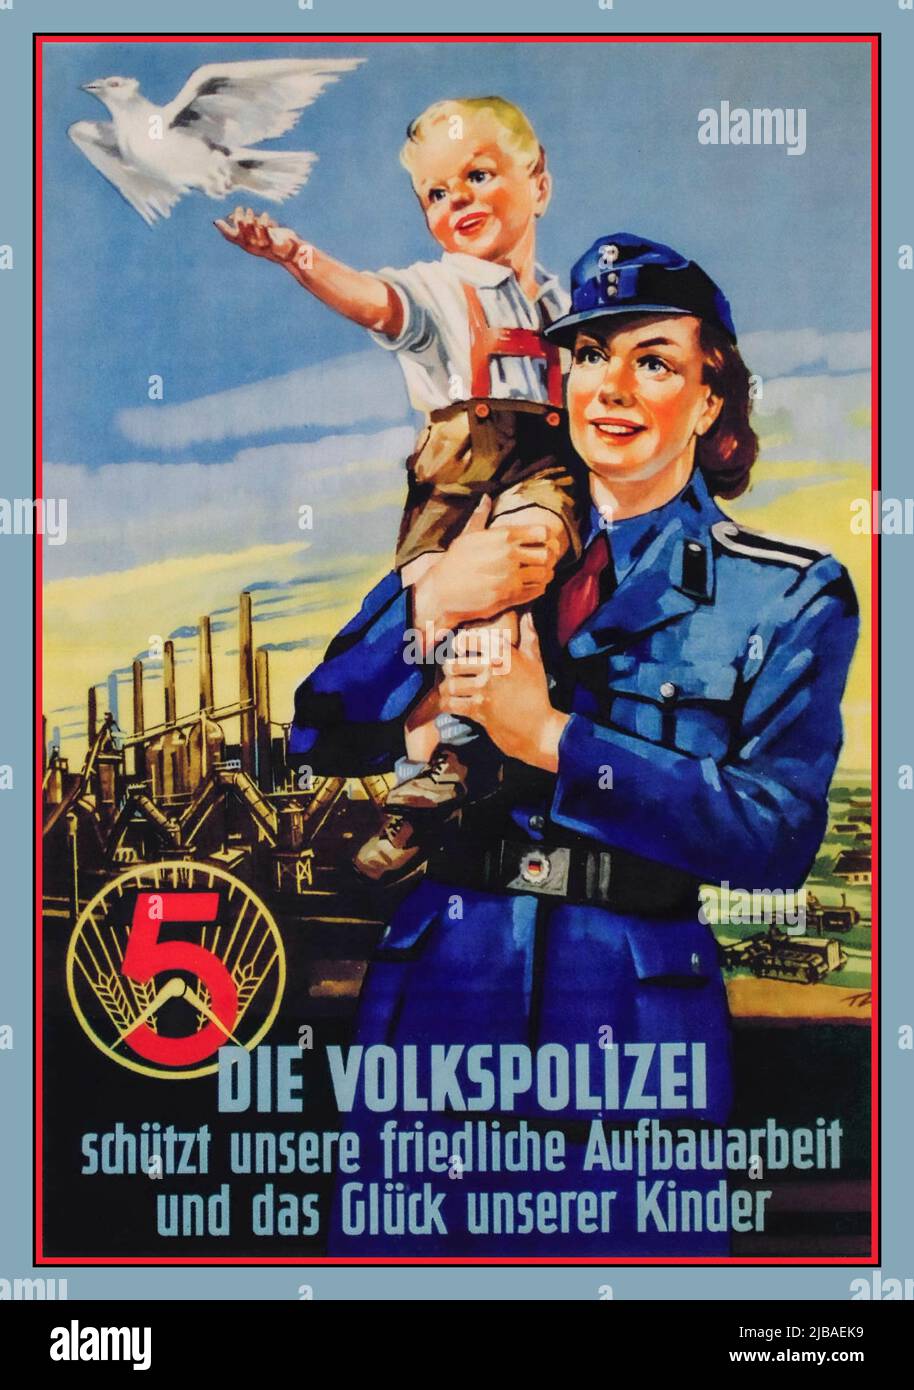 DIE VOLKSPOLIZEI, 1954 Post War East Germany Propaganda Poster for The Peoples Police. ' the people's police protect our peaceful construction work and the happiness of our children '  die volkspolizei schützt unsere friedliche aufbauarbeit und das gluck unserer kinder Stock Photo